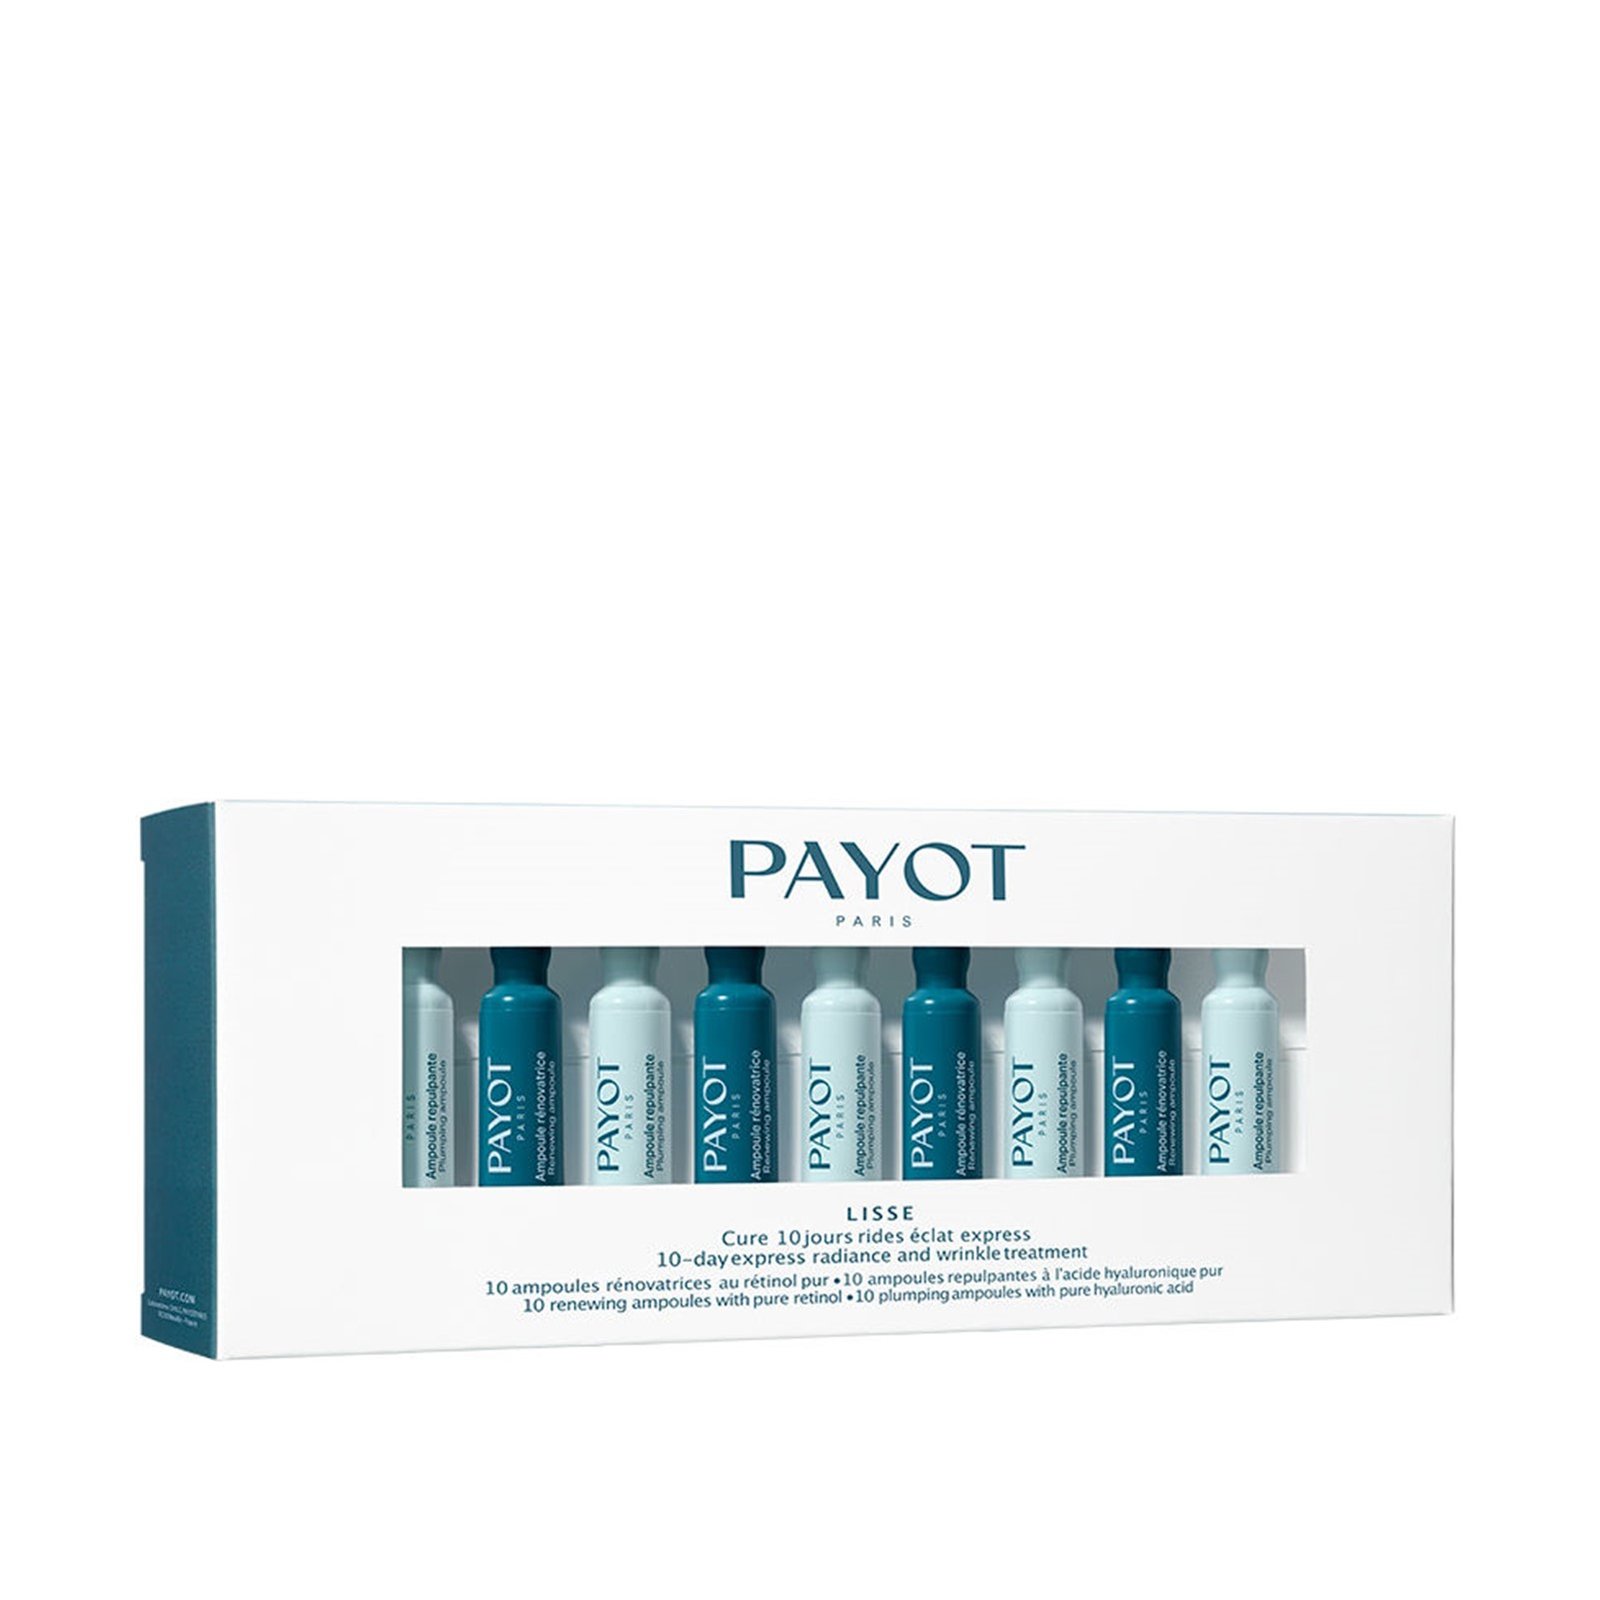 Payot Lisse 10-Day Express Radiance And Wrinkle Treatment 10x1ml